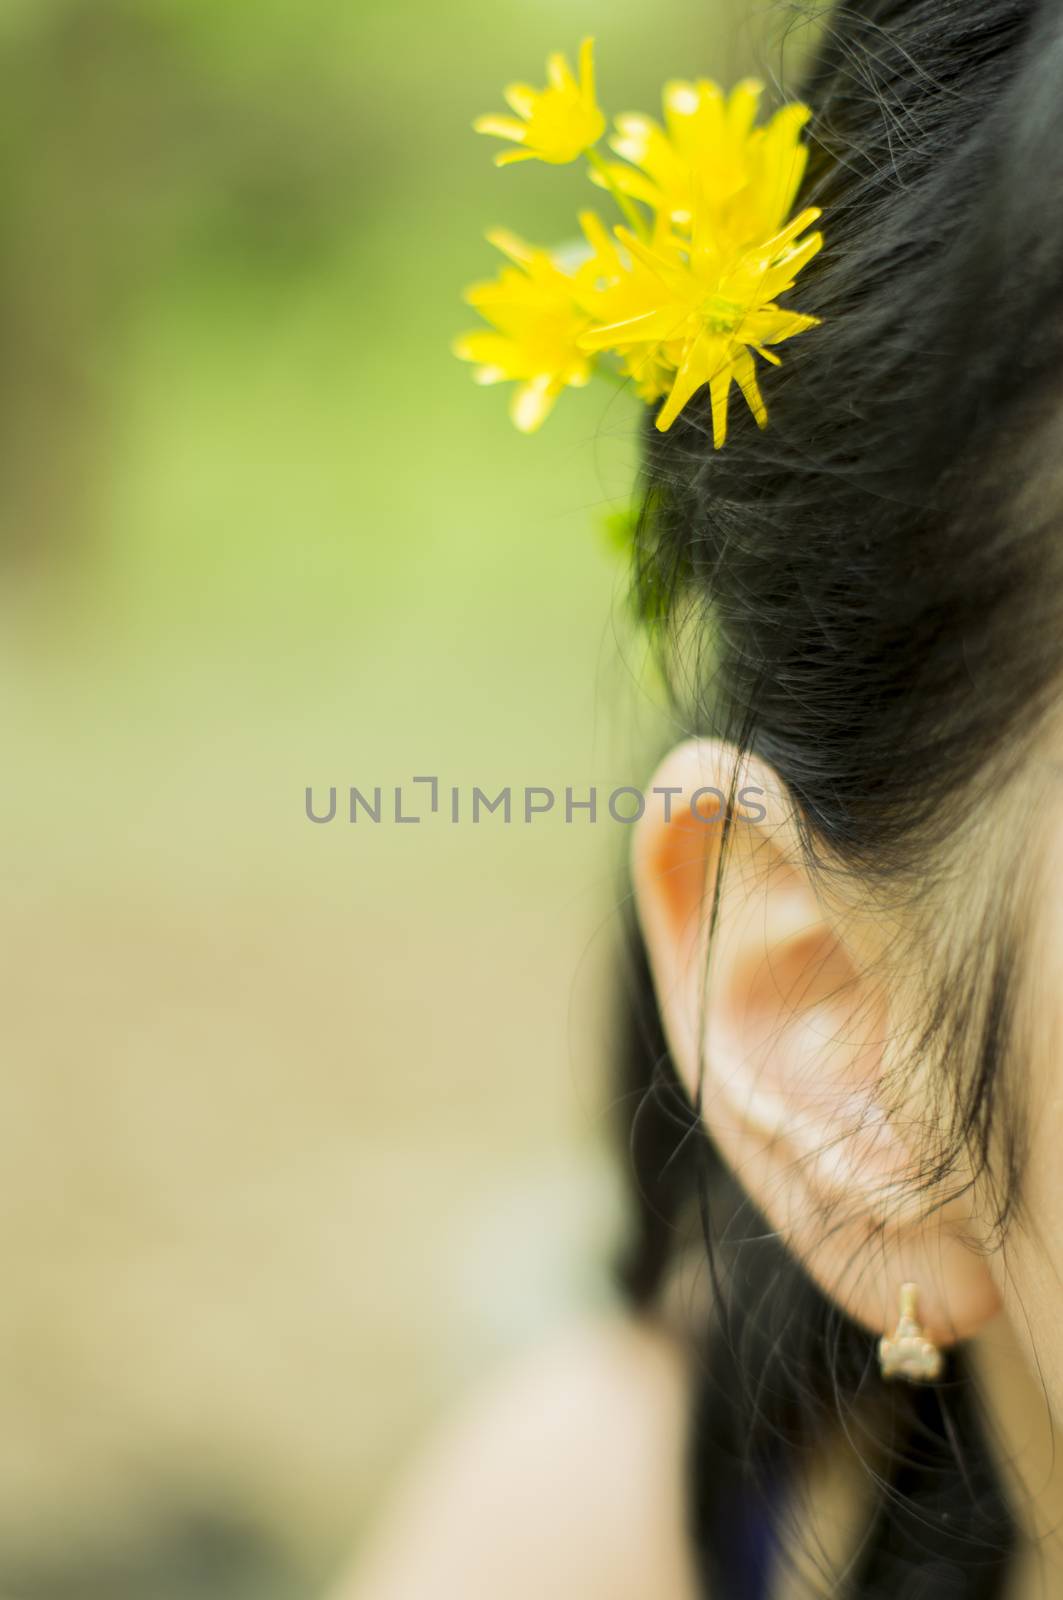 Woman with a flower behind her ear. For your commercial and editorial use